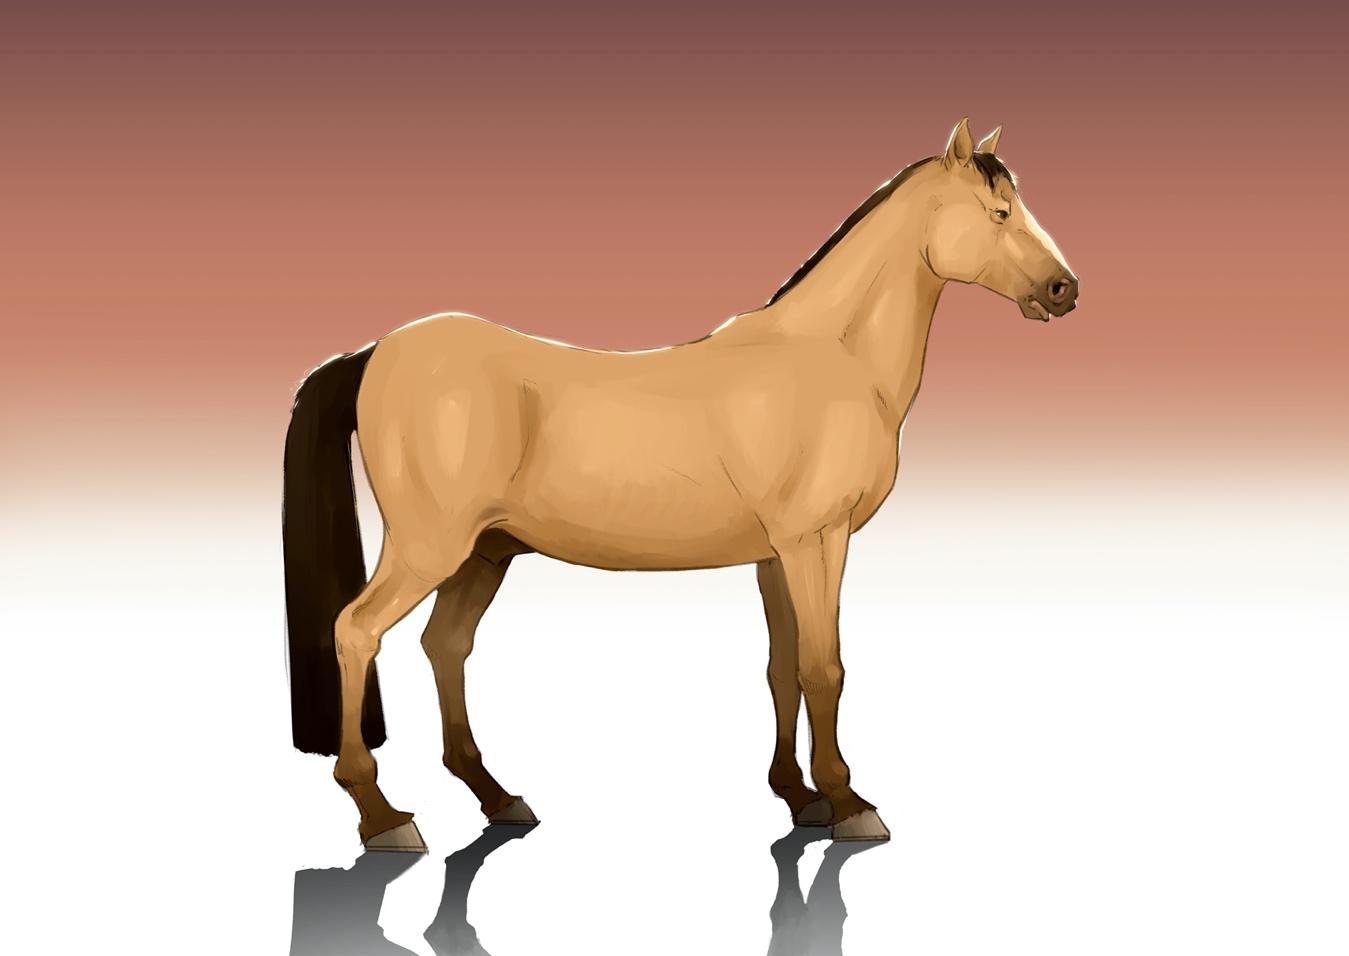  How To Draw A Mustang Horse of the decade The ultimate guide 